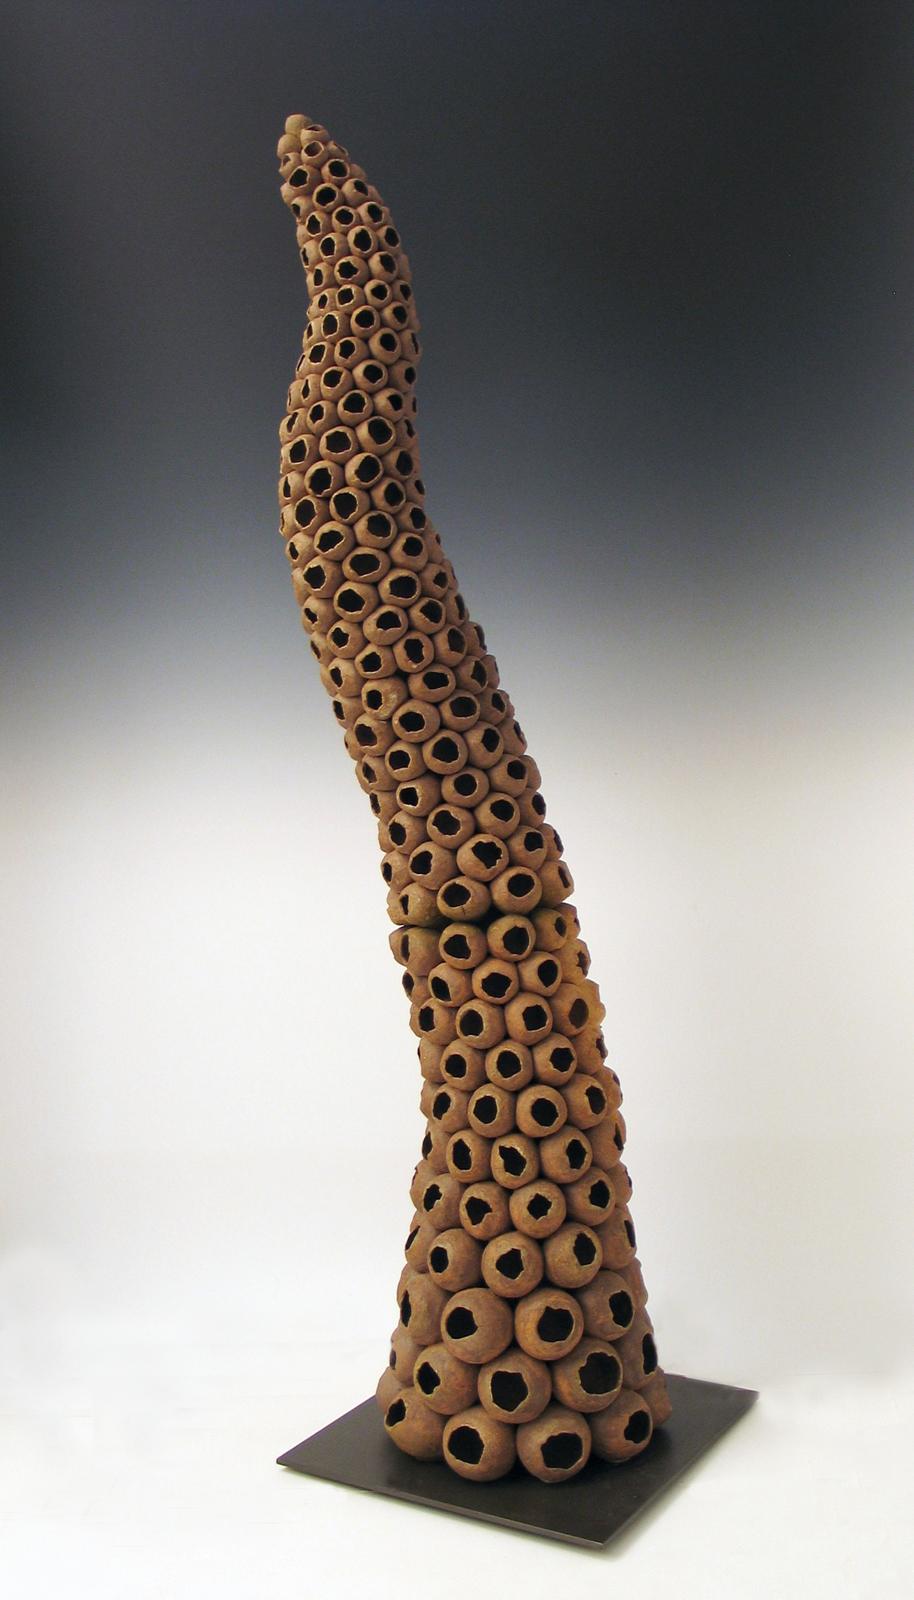 “Depleted”, natural tan ceramic seedpods - Gray Abstract Sculpture by Elaine Lorenz